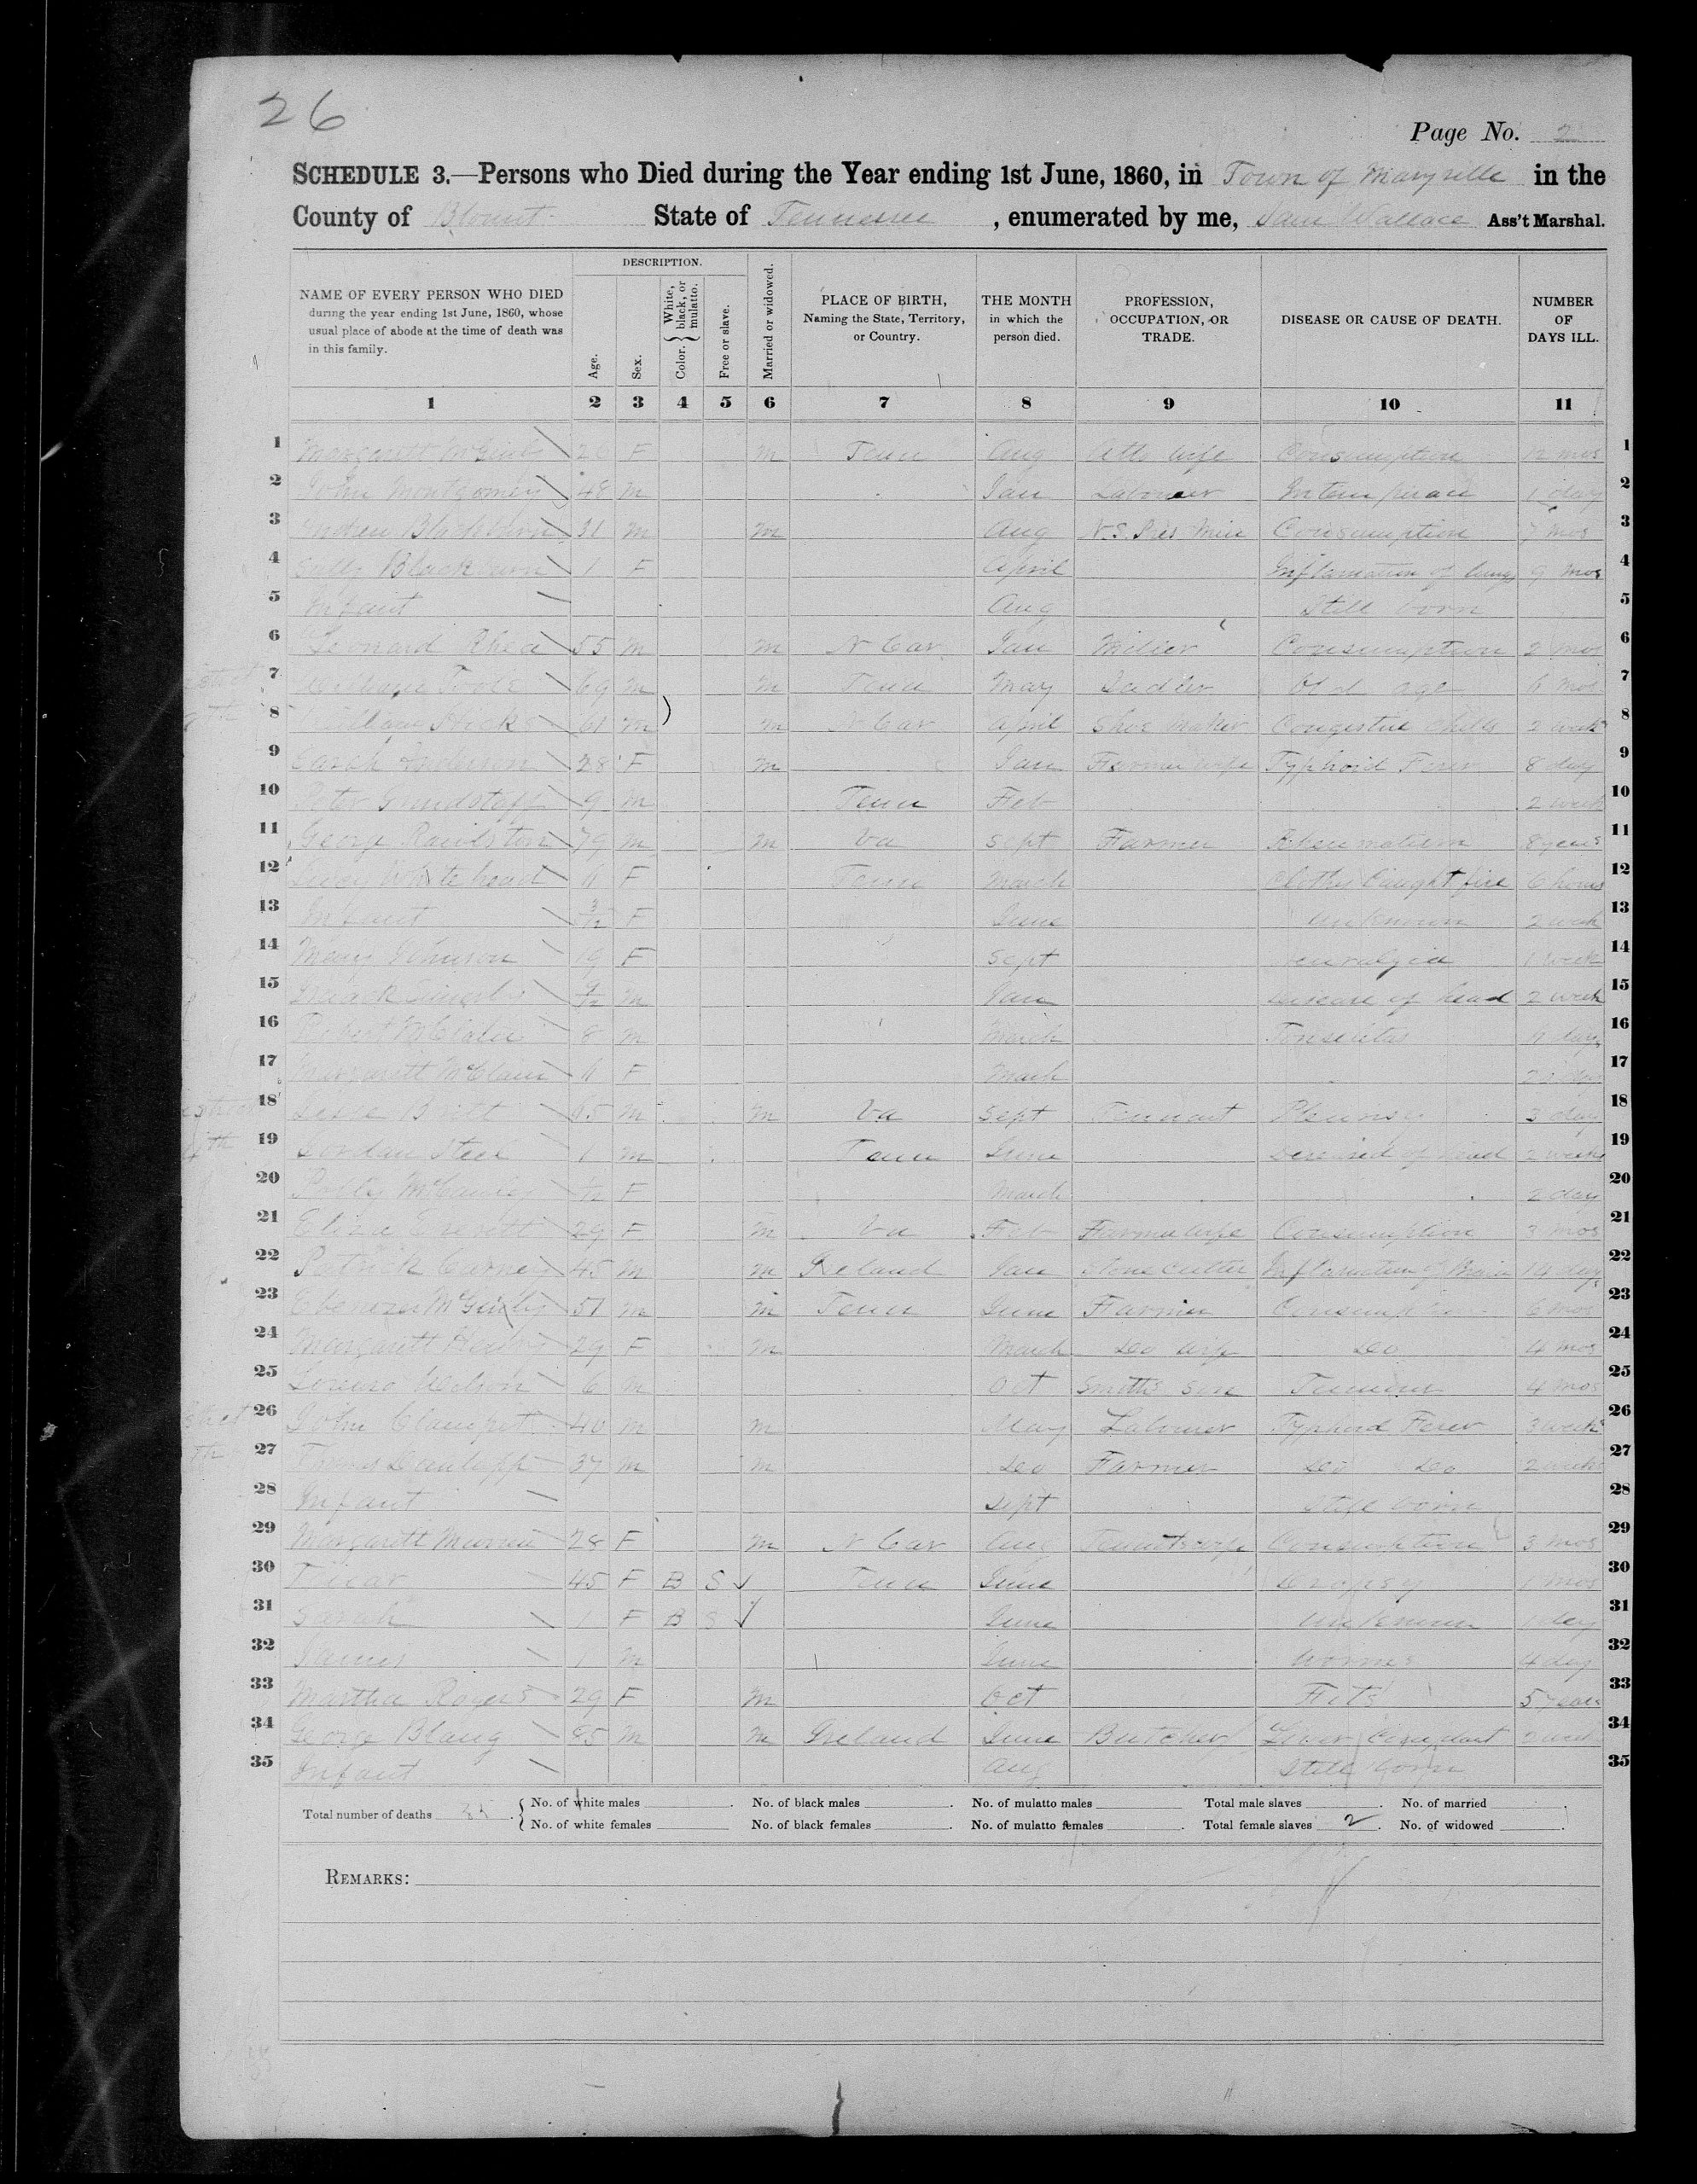 1860 Blount County Mortality Schedule Page 5